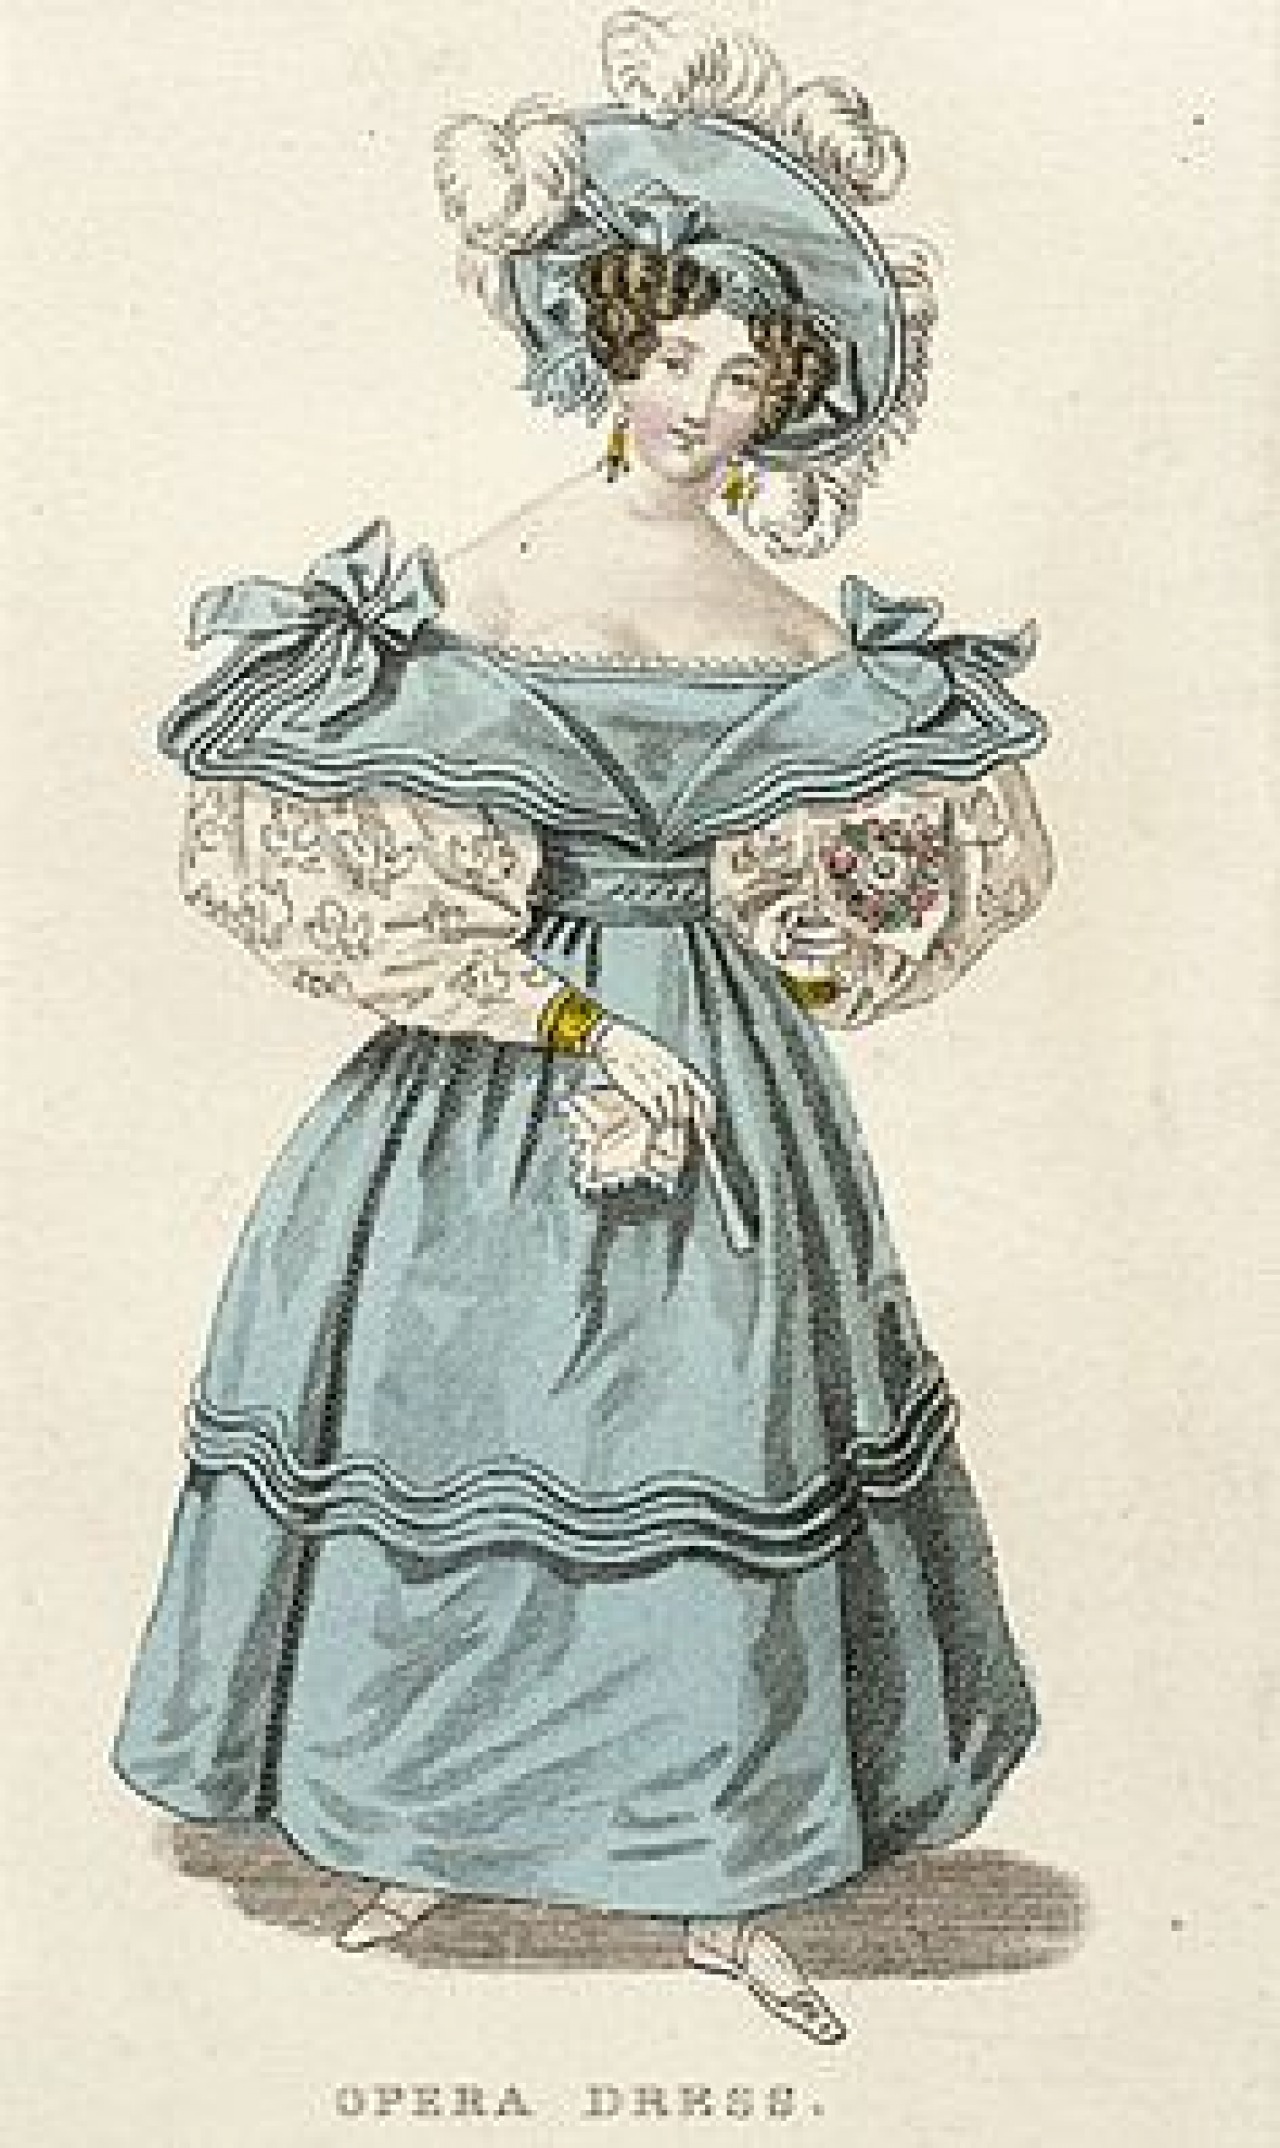 During the romantic period dresses now have more of an X shape silhouette.